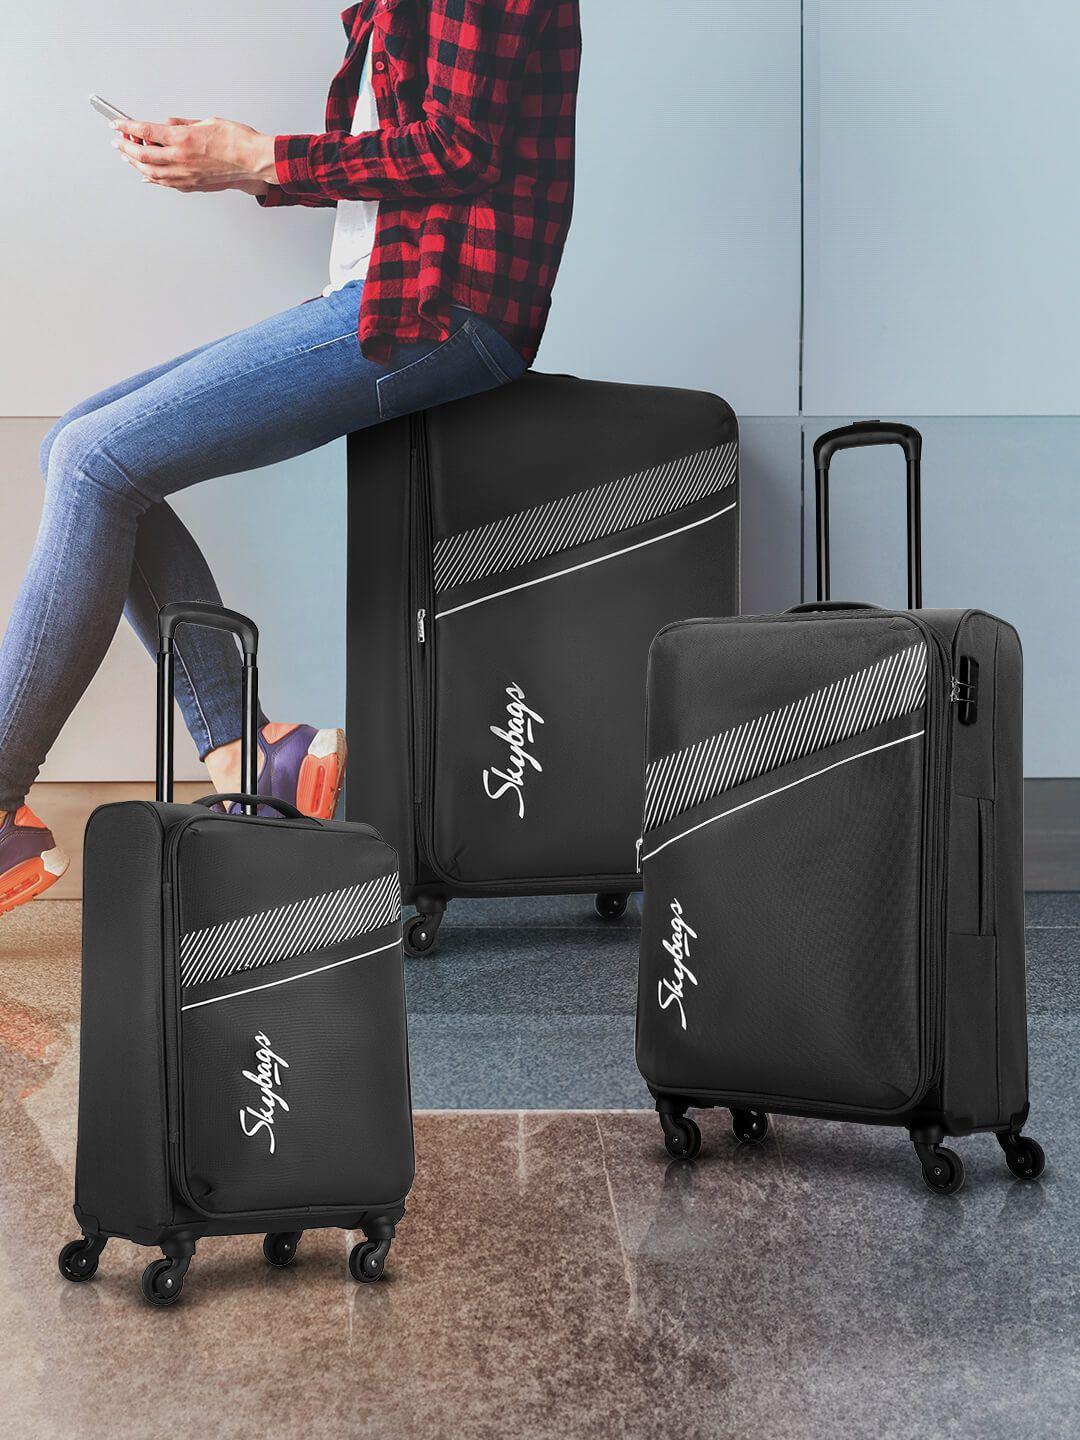 skybags set of 3 trolley suitcases - cabin, medium and large